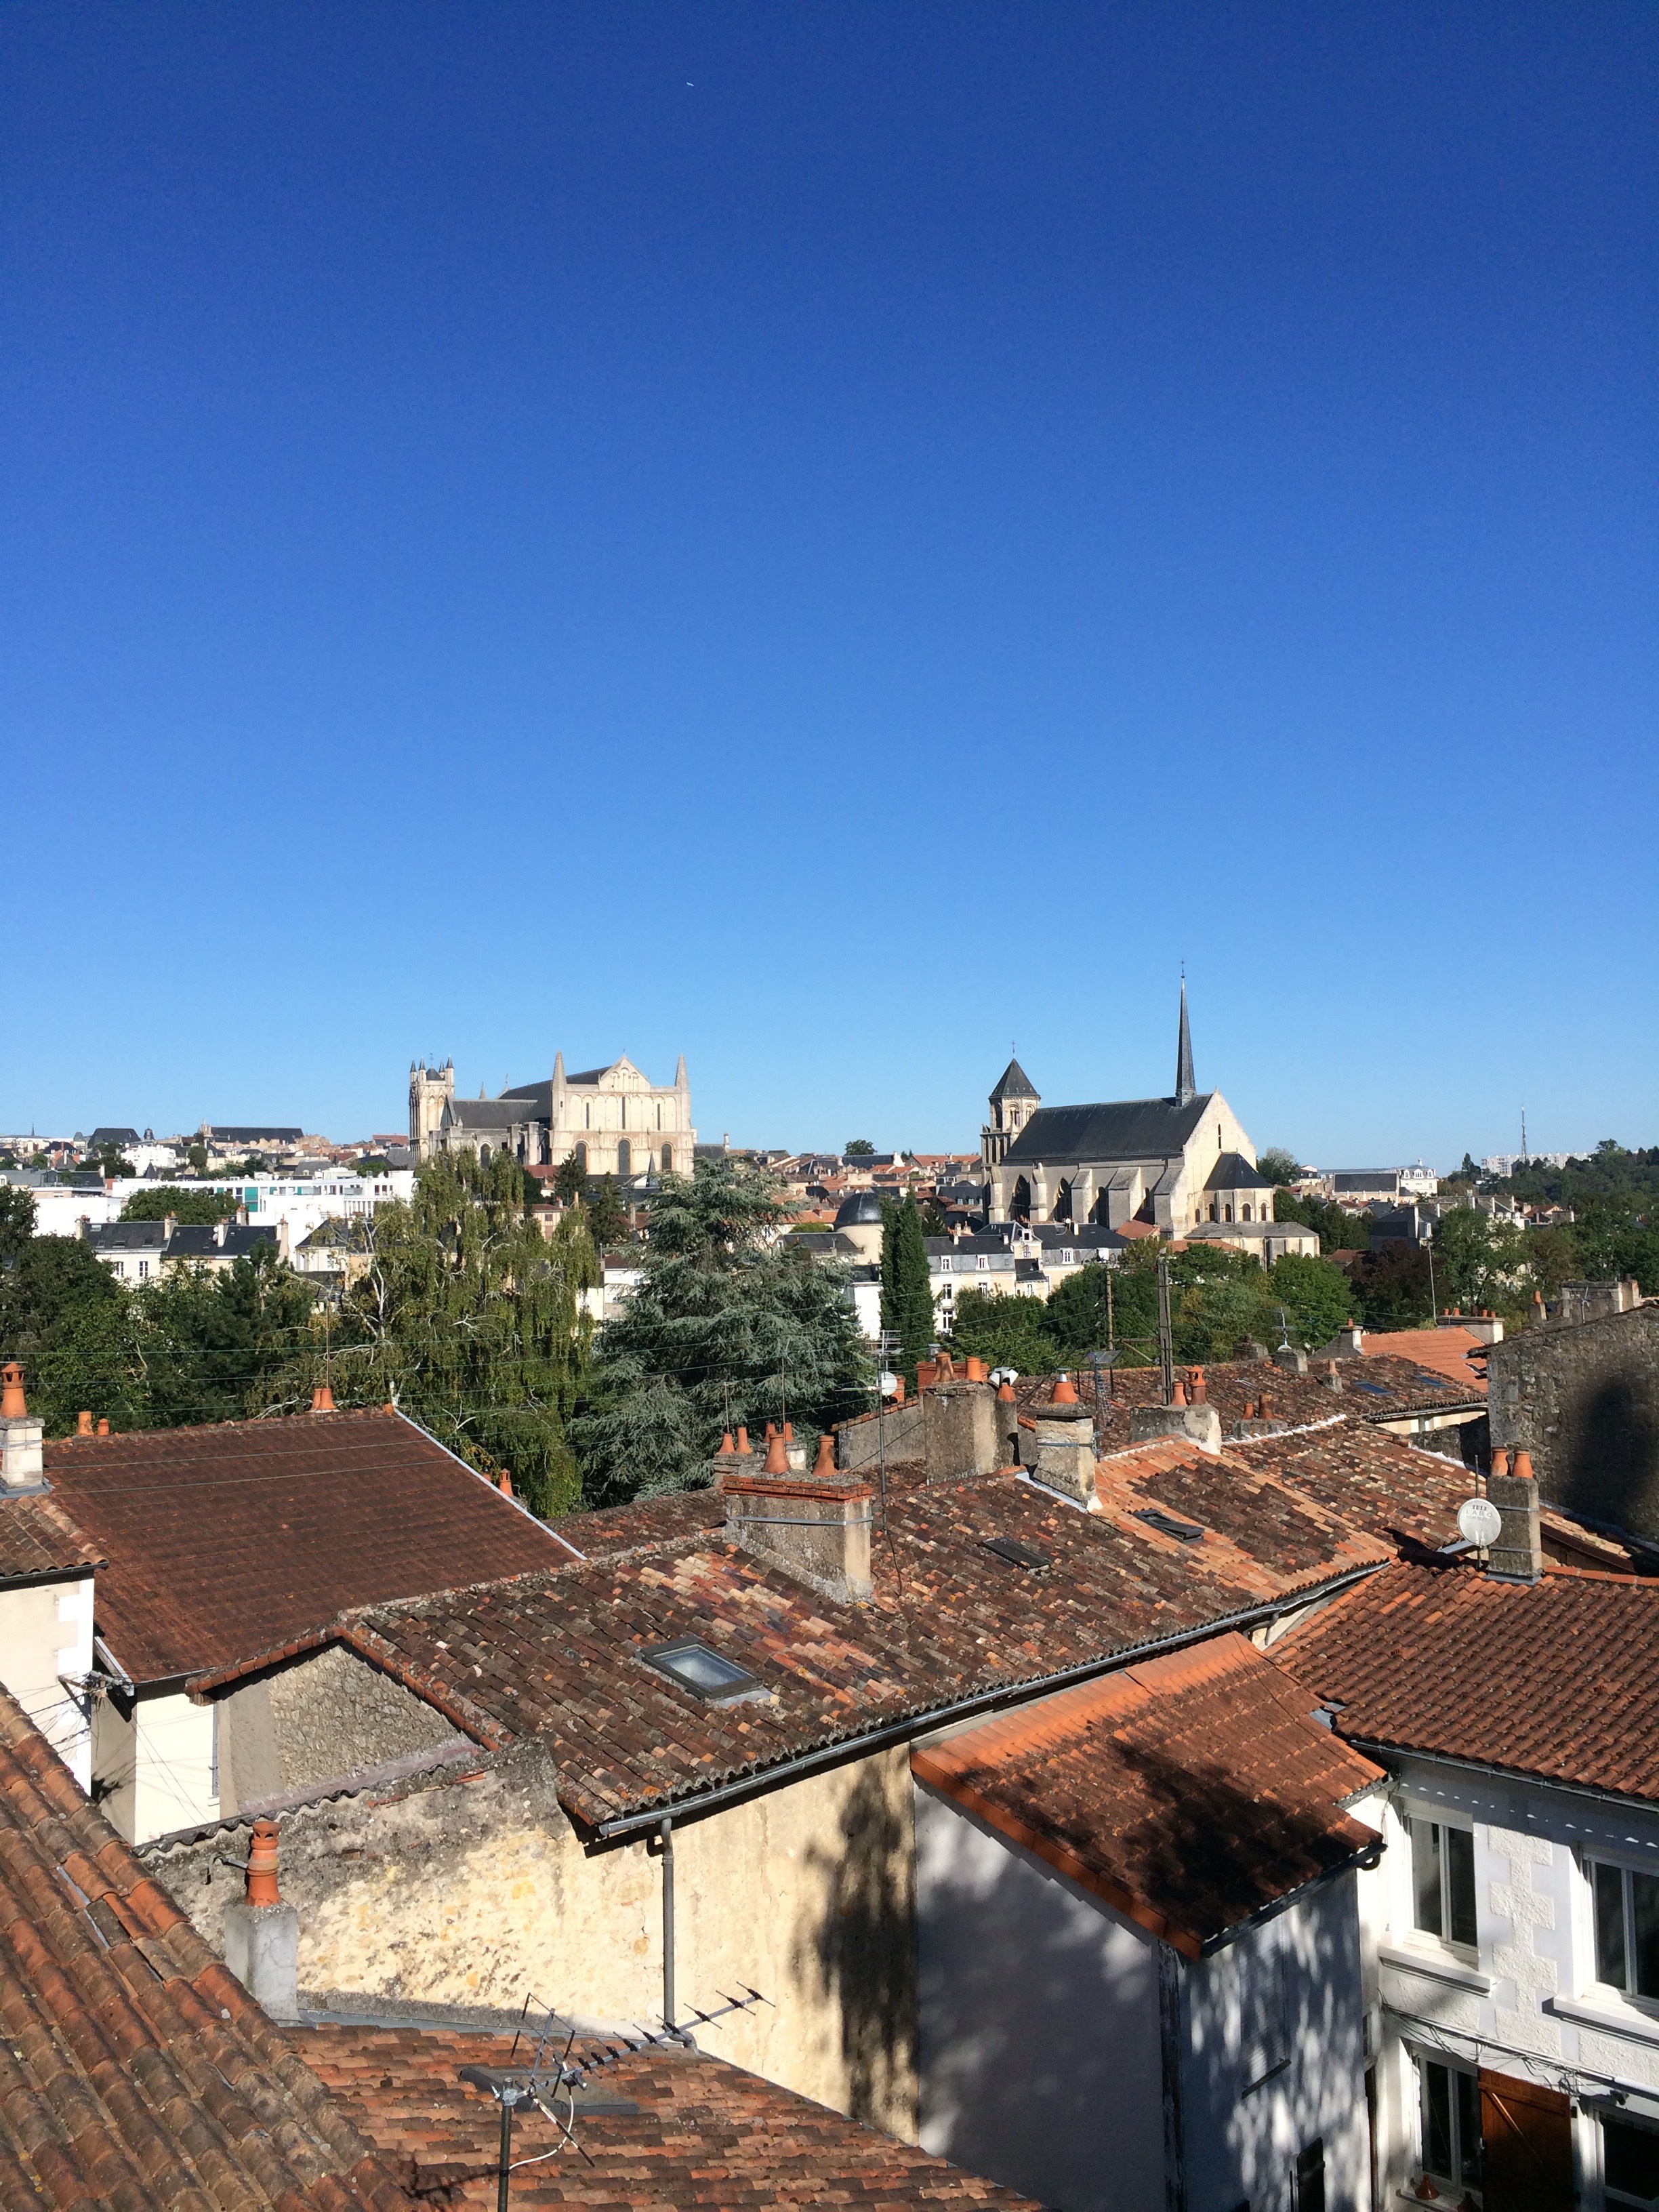 The Poitiers cityscape